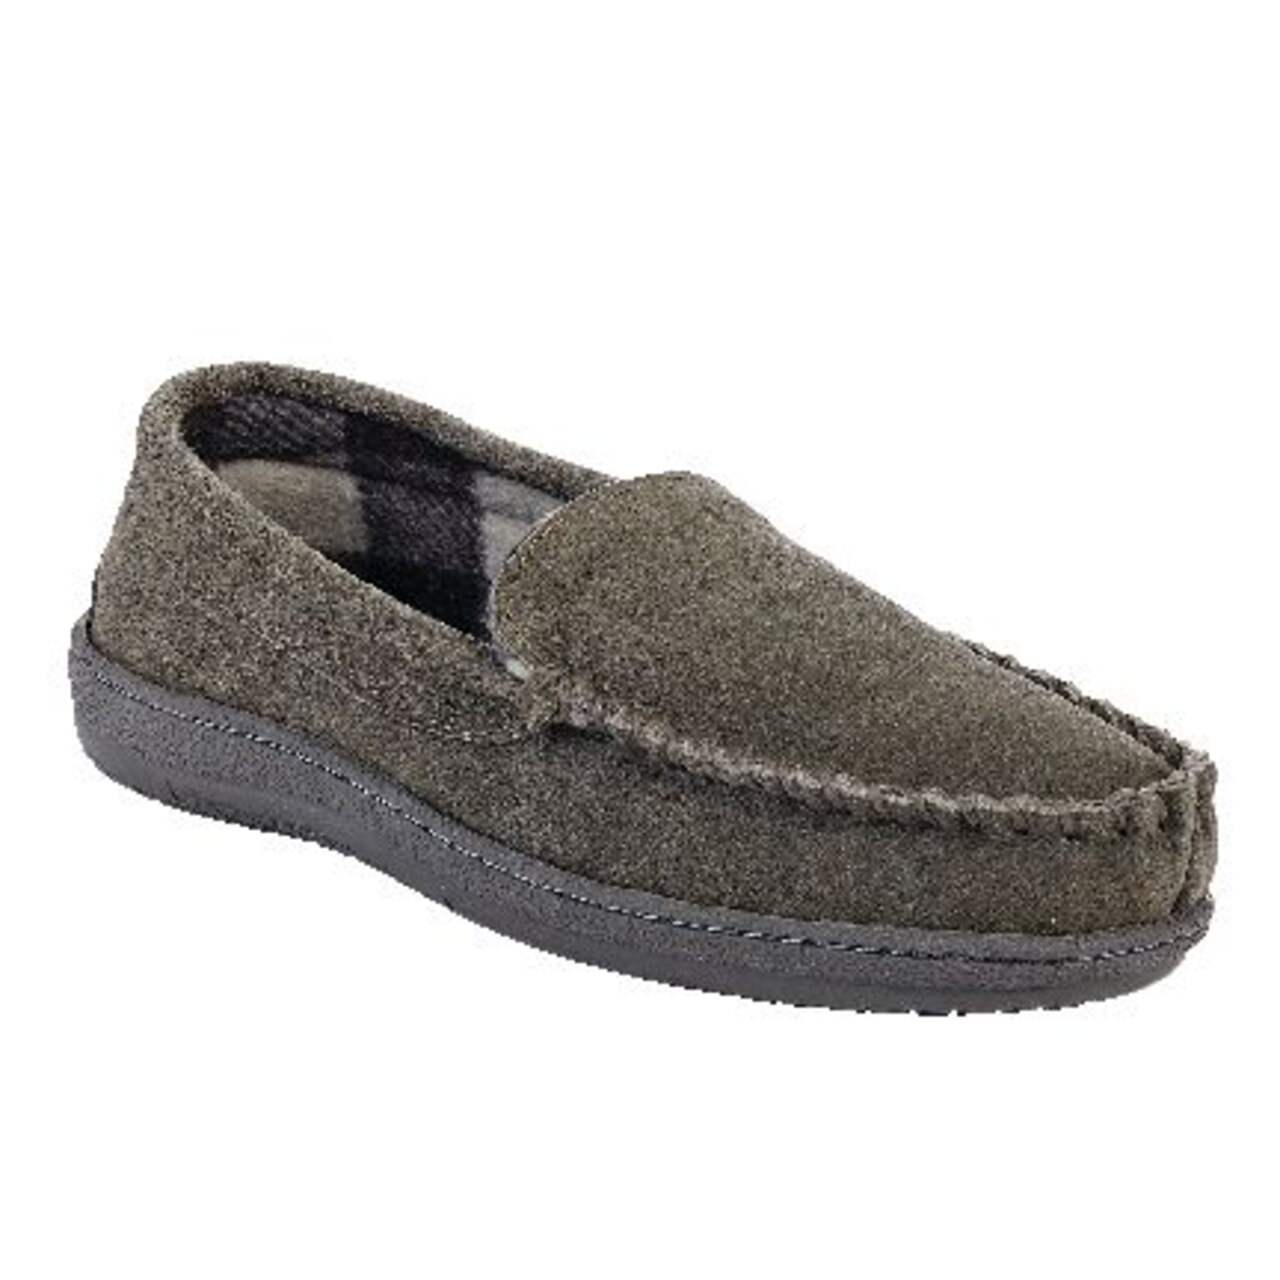 Outbound Men's Fleece Lined Leather Indoor House Slippers Non-Slip, Grey